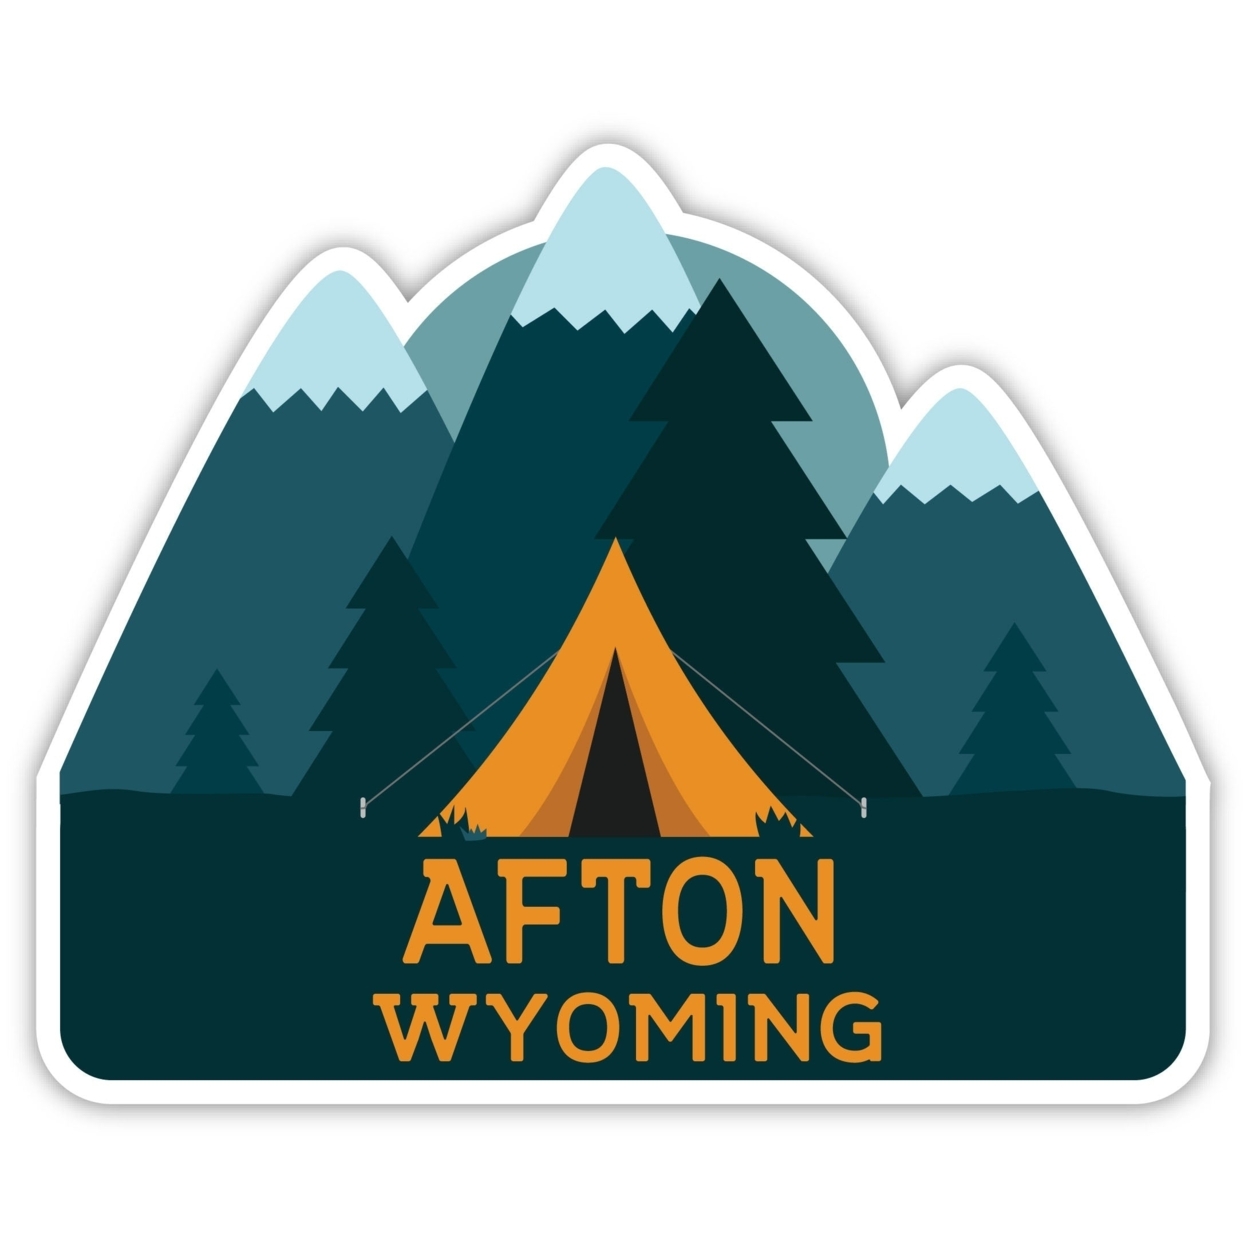 Afton Wyoming Souvenir Decorative Stickers (Choose Theme And Size) - 4-Pack, 4-Inch, Tent